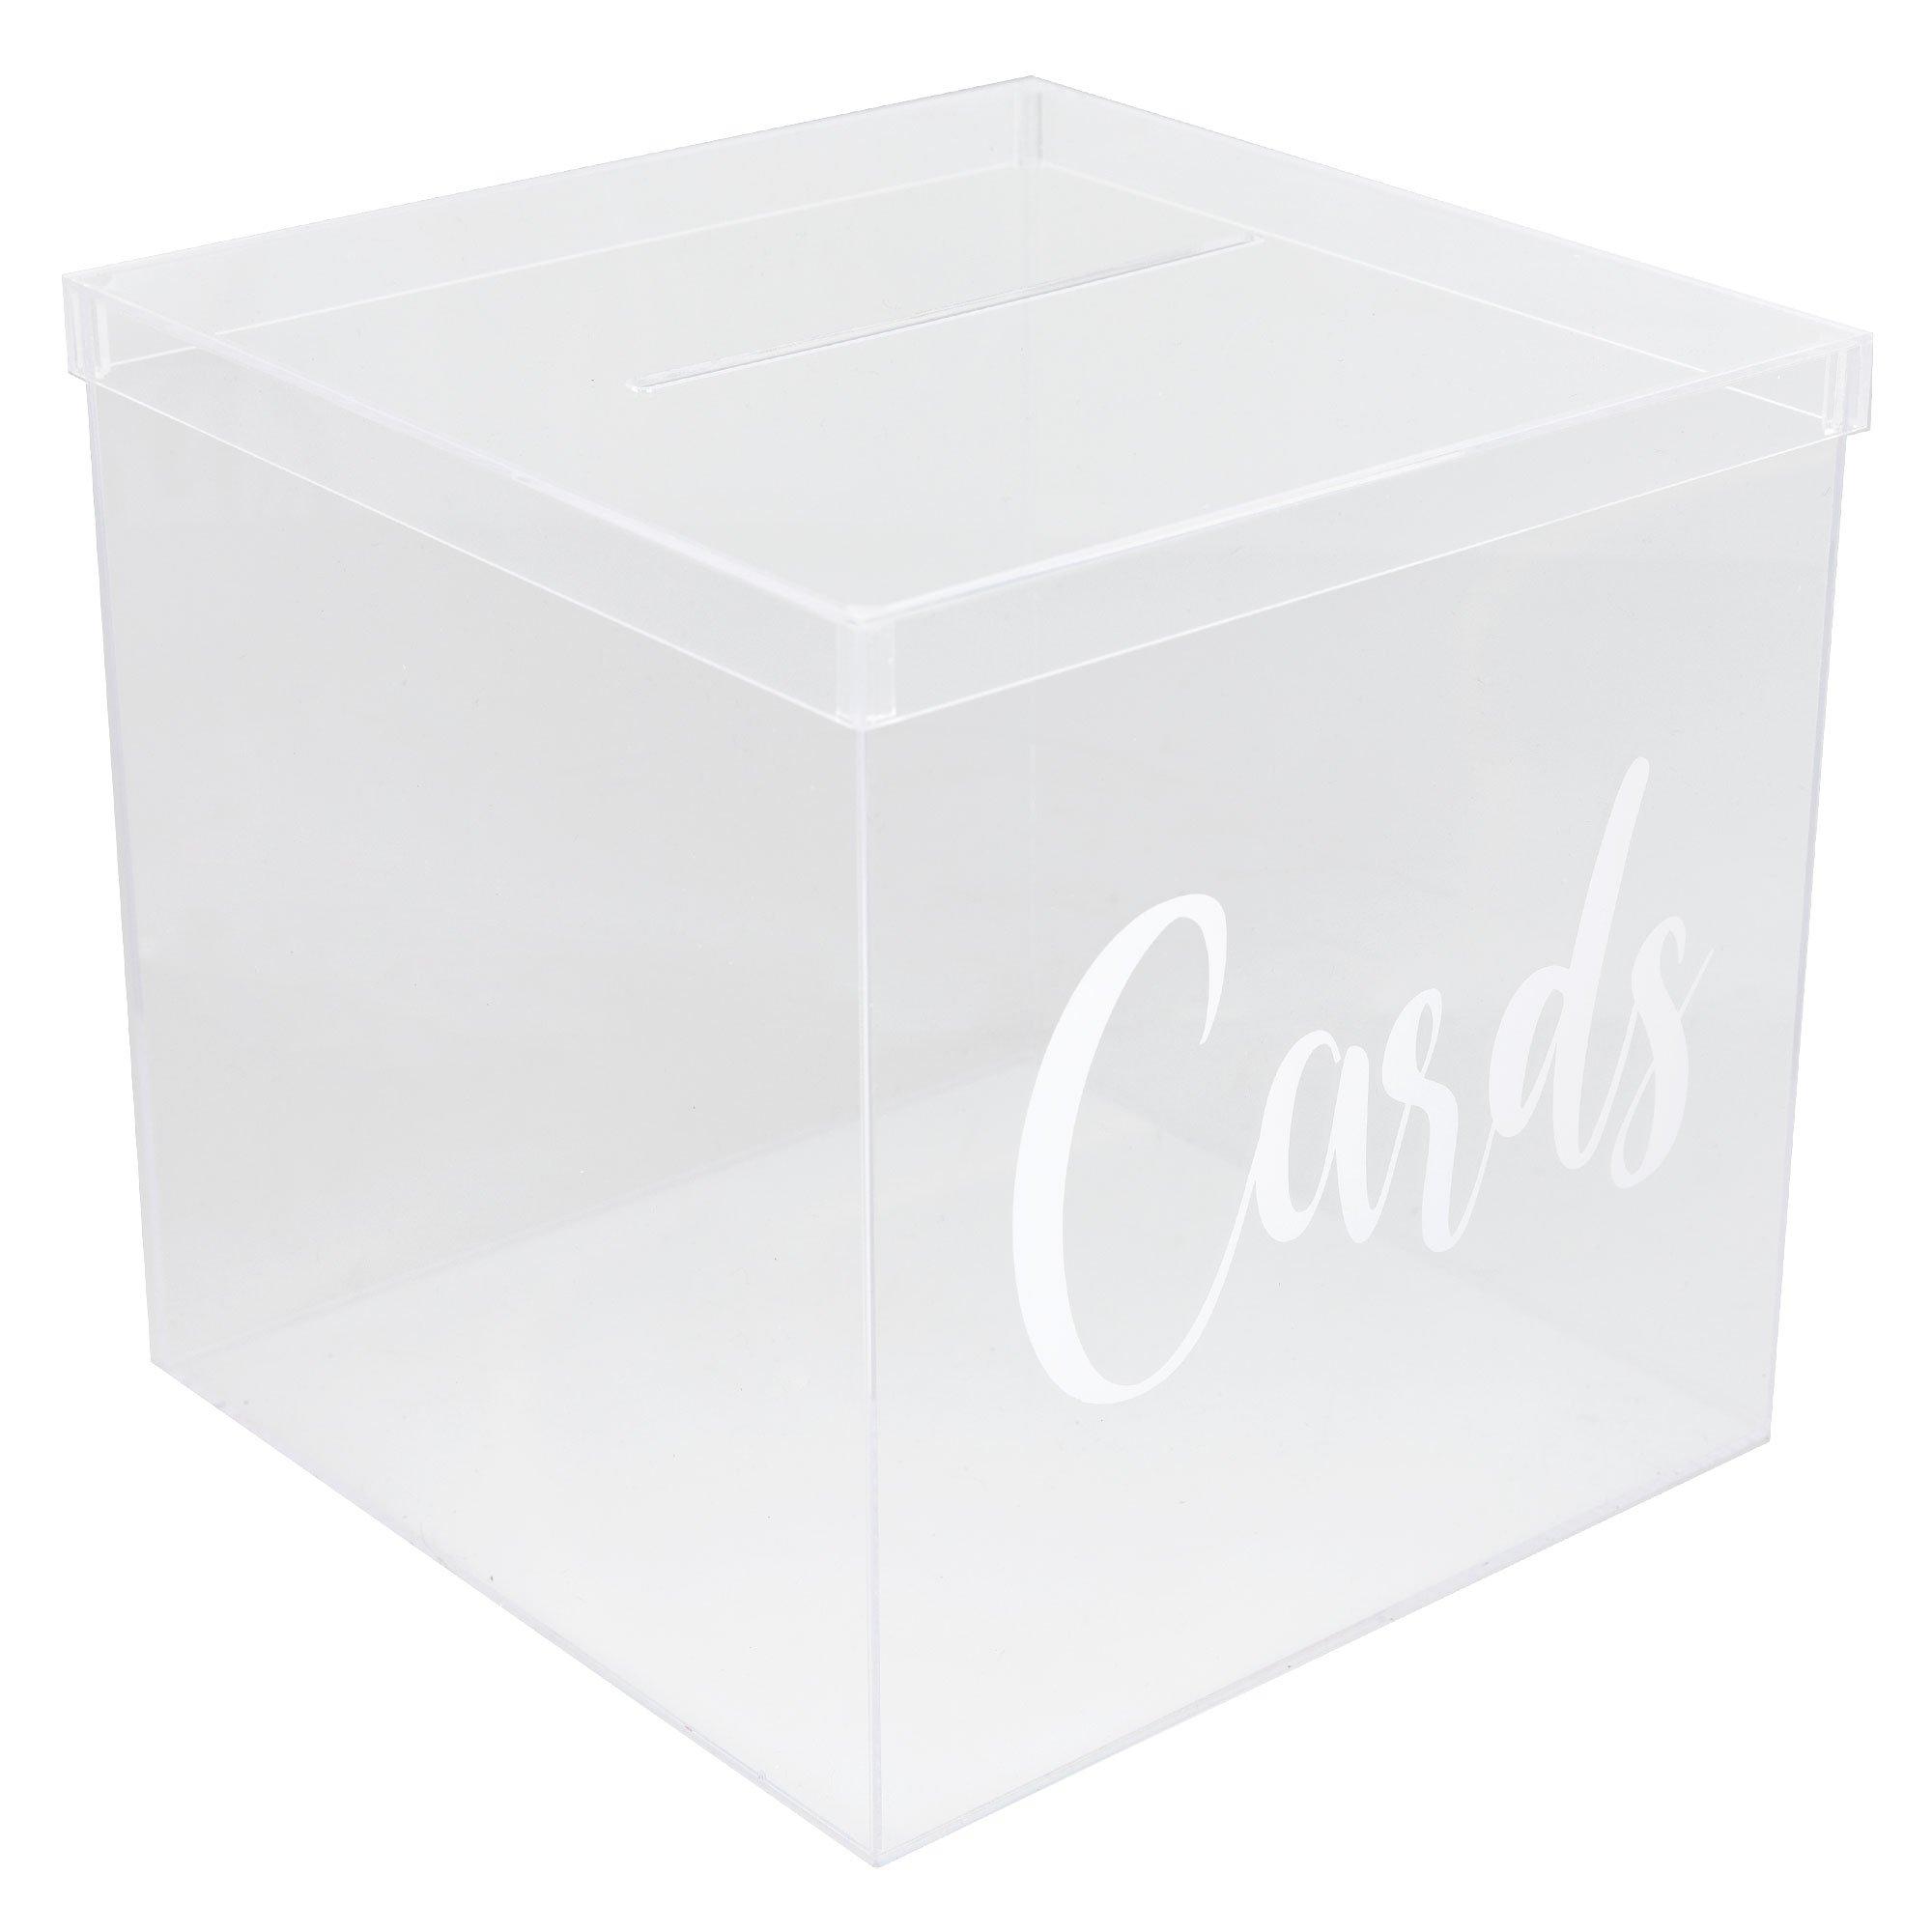 Darware Wooden Wedding Card Box for Reception, White Decorative Card Receiving Box for Birthdays, Showers, Graduations and More